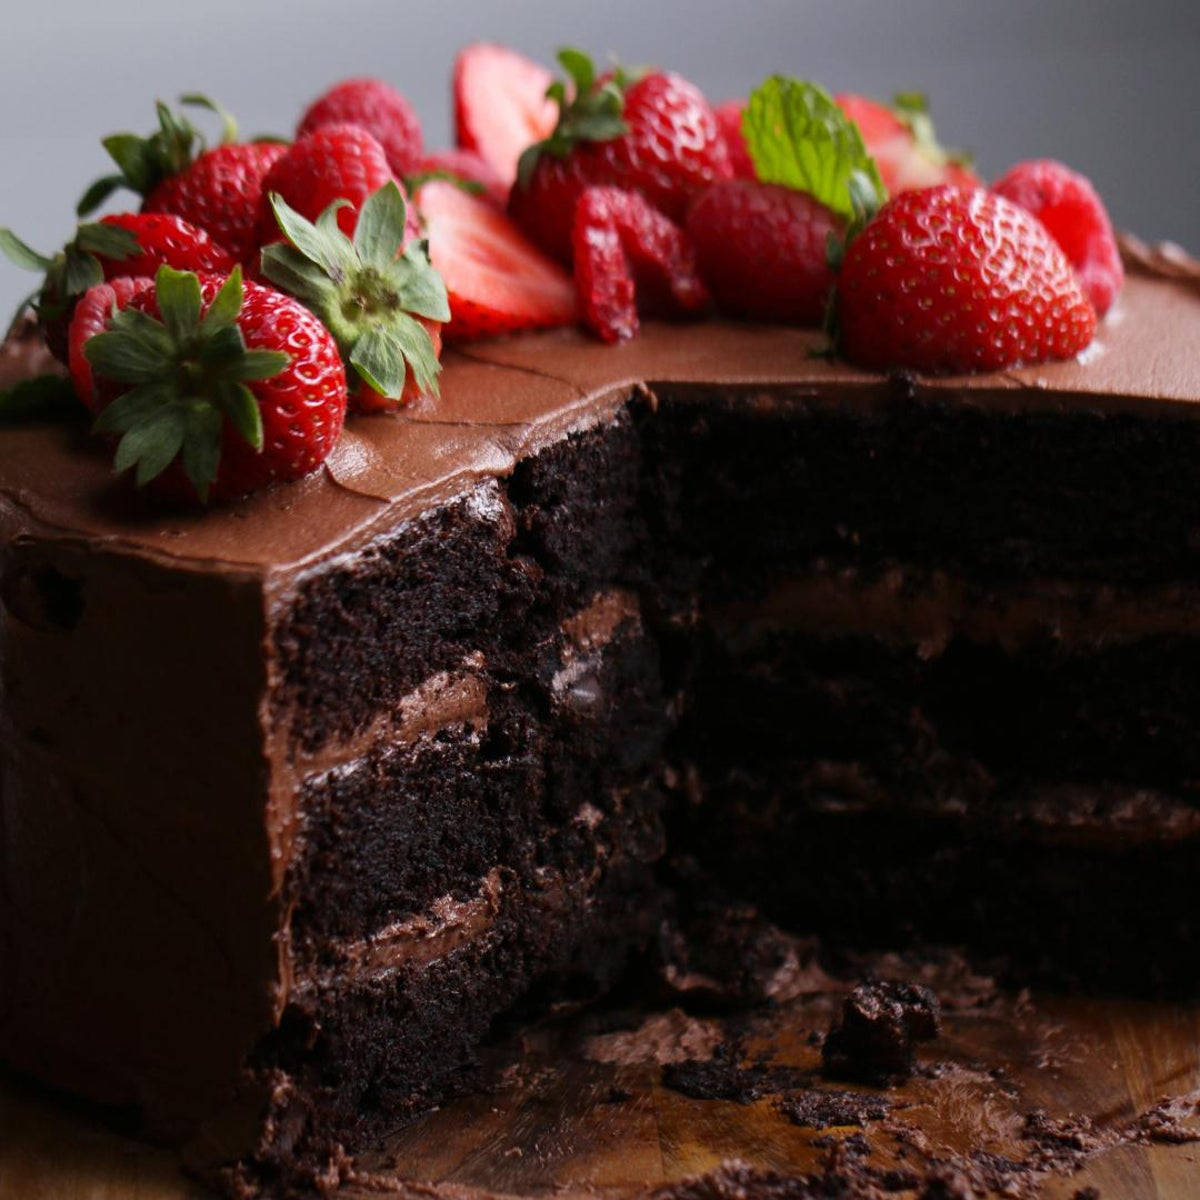 Strawberry Topped Chocolate Cake Wallpaper